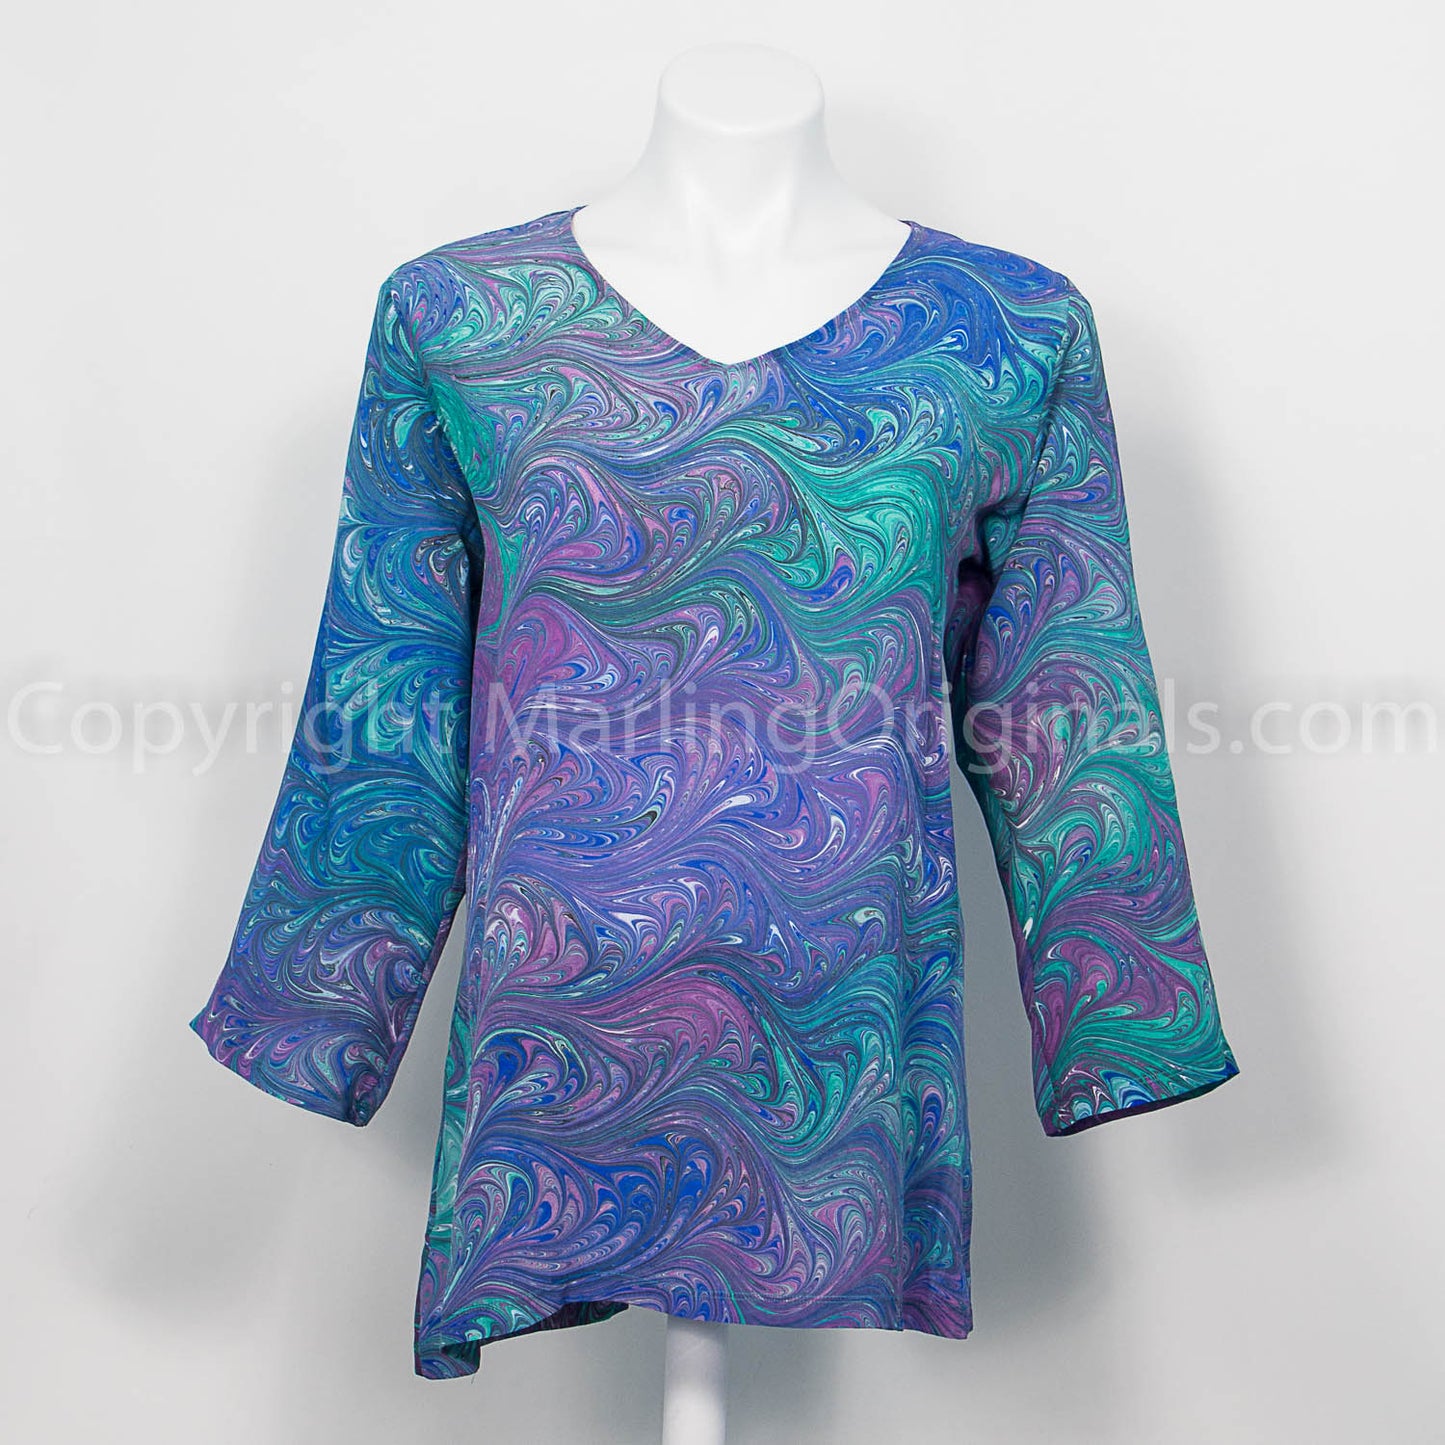 v neck silk tunic with 3/4 sleeves and marbled feather pattern in soft jewel tones